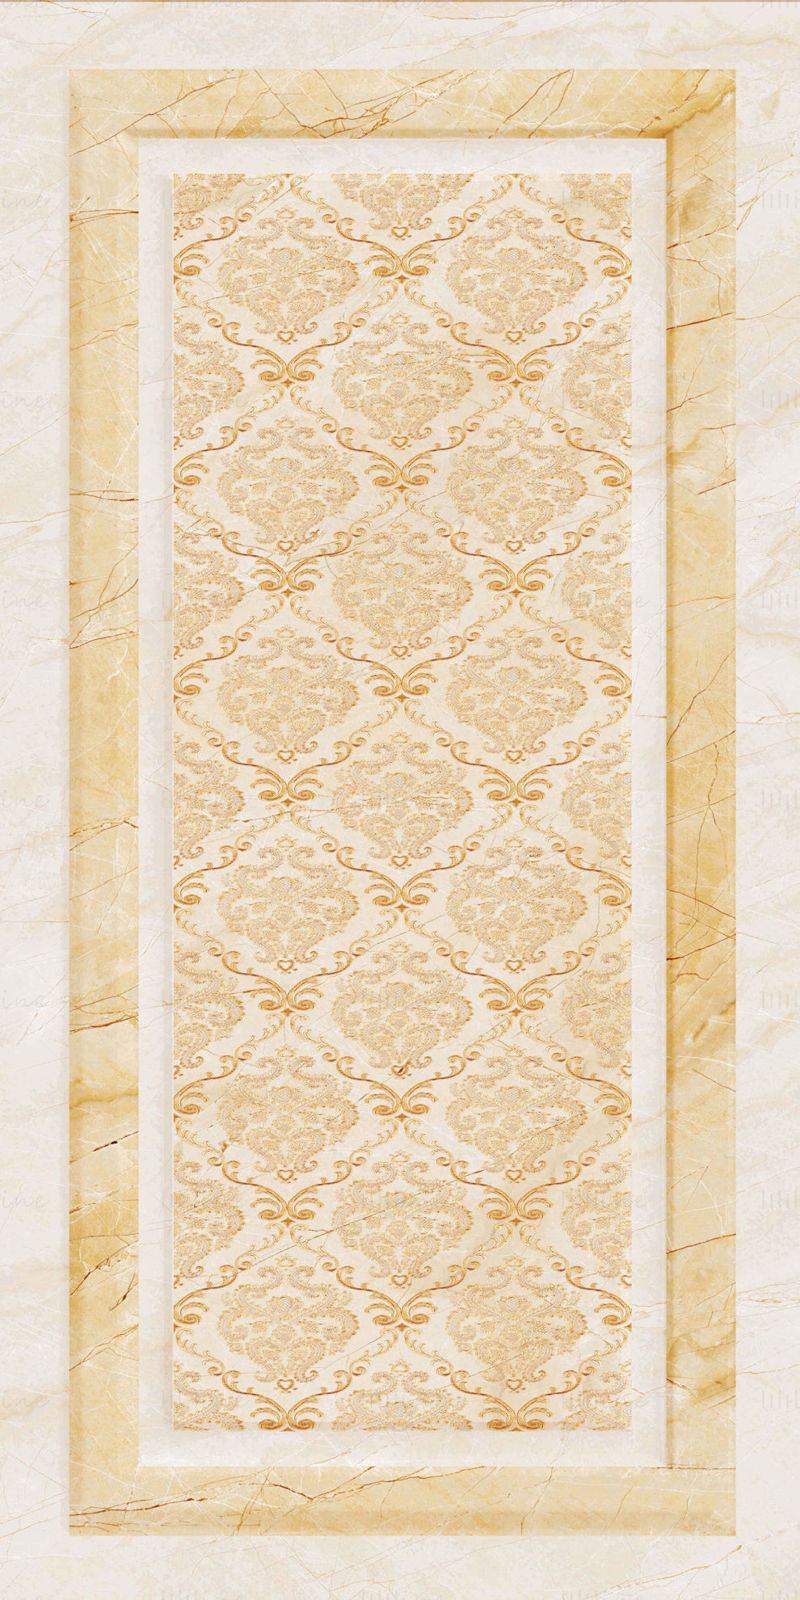 Wall ceramic tile texture pattern